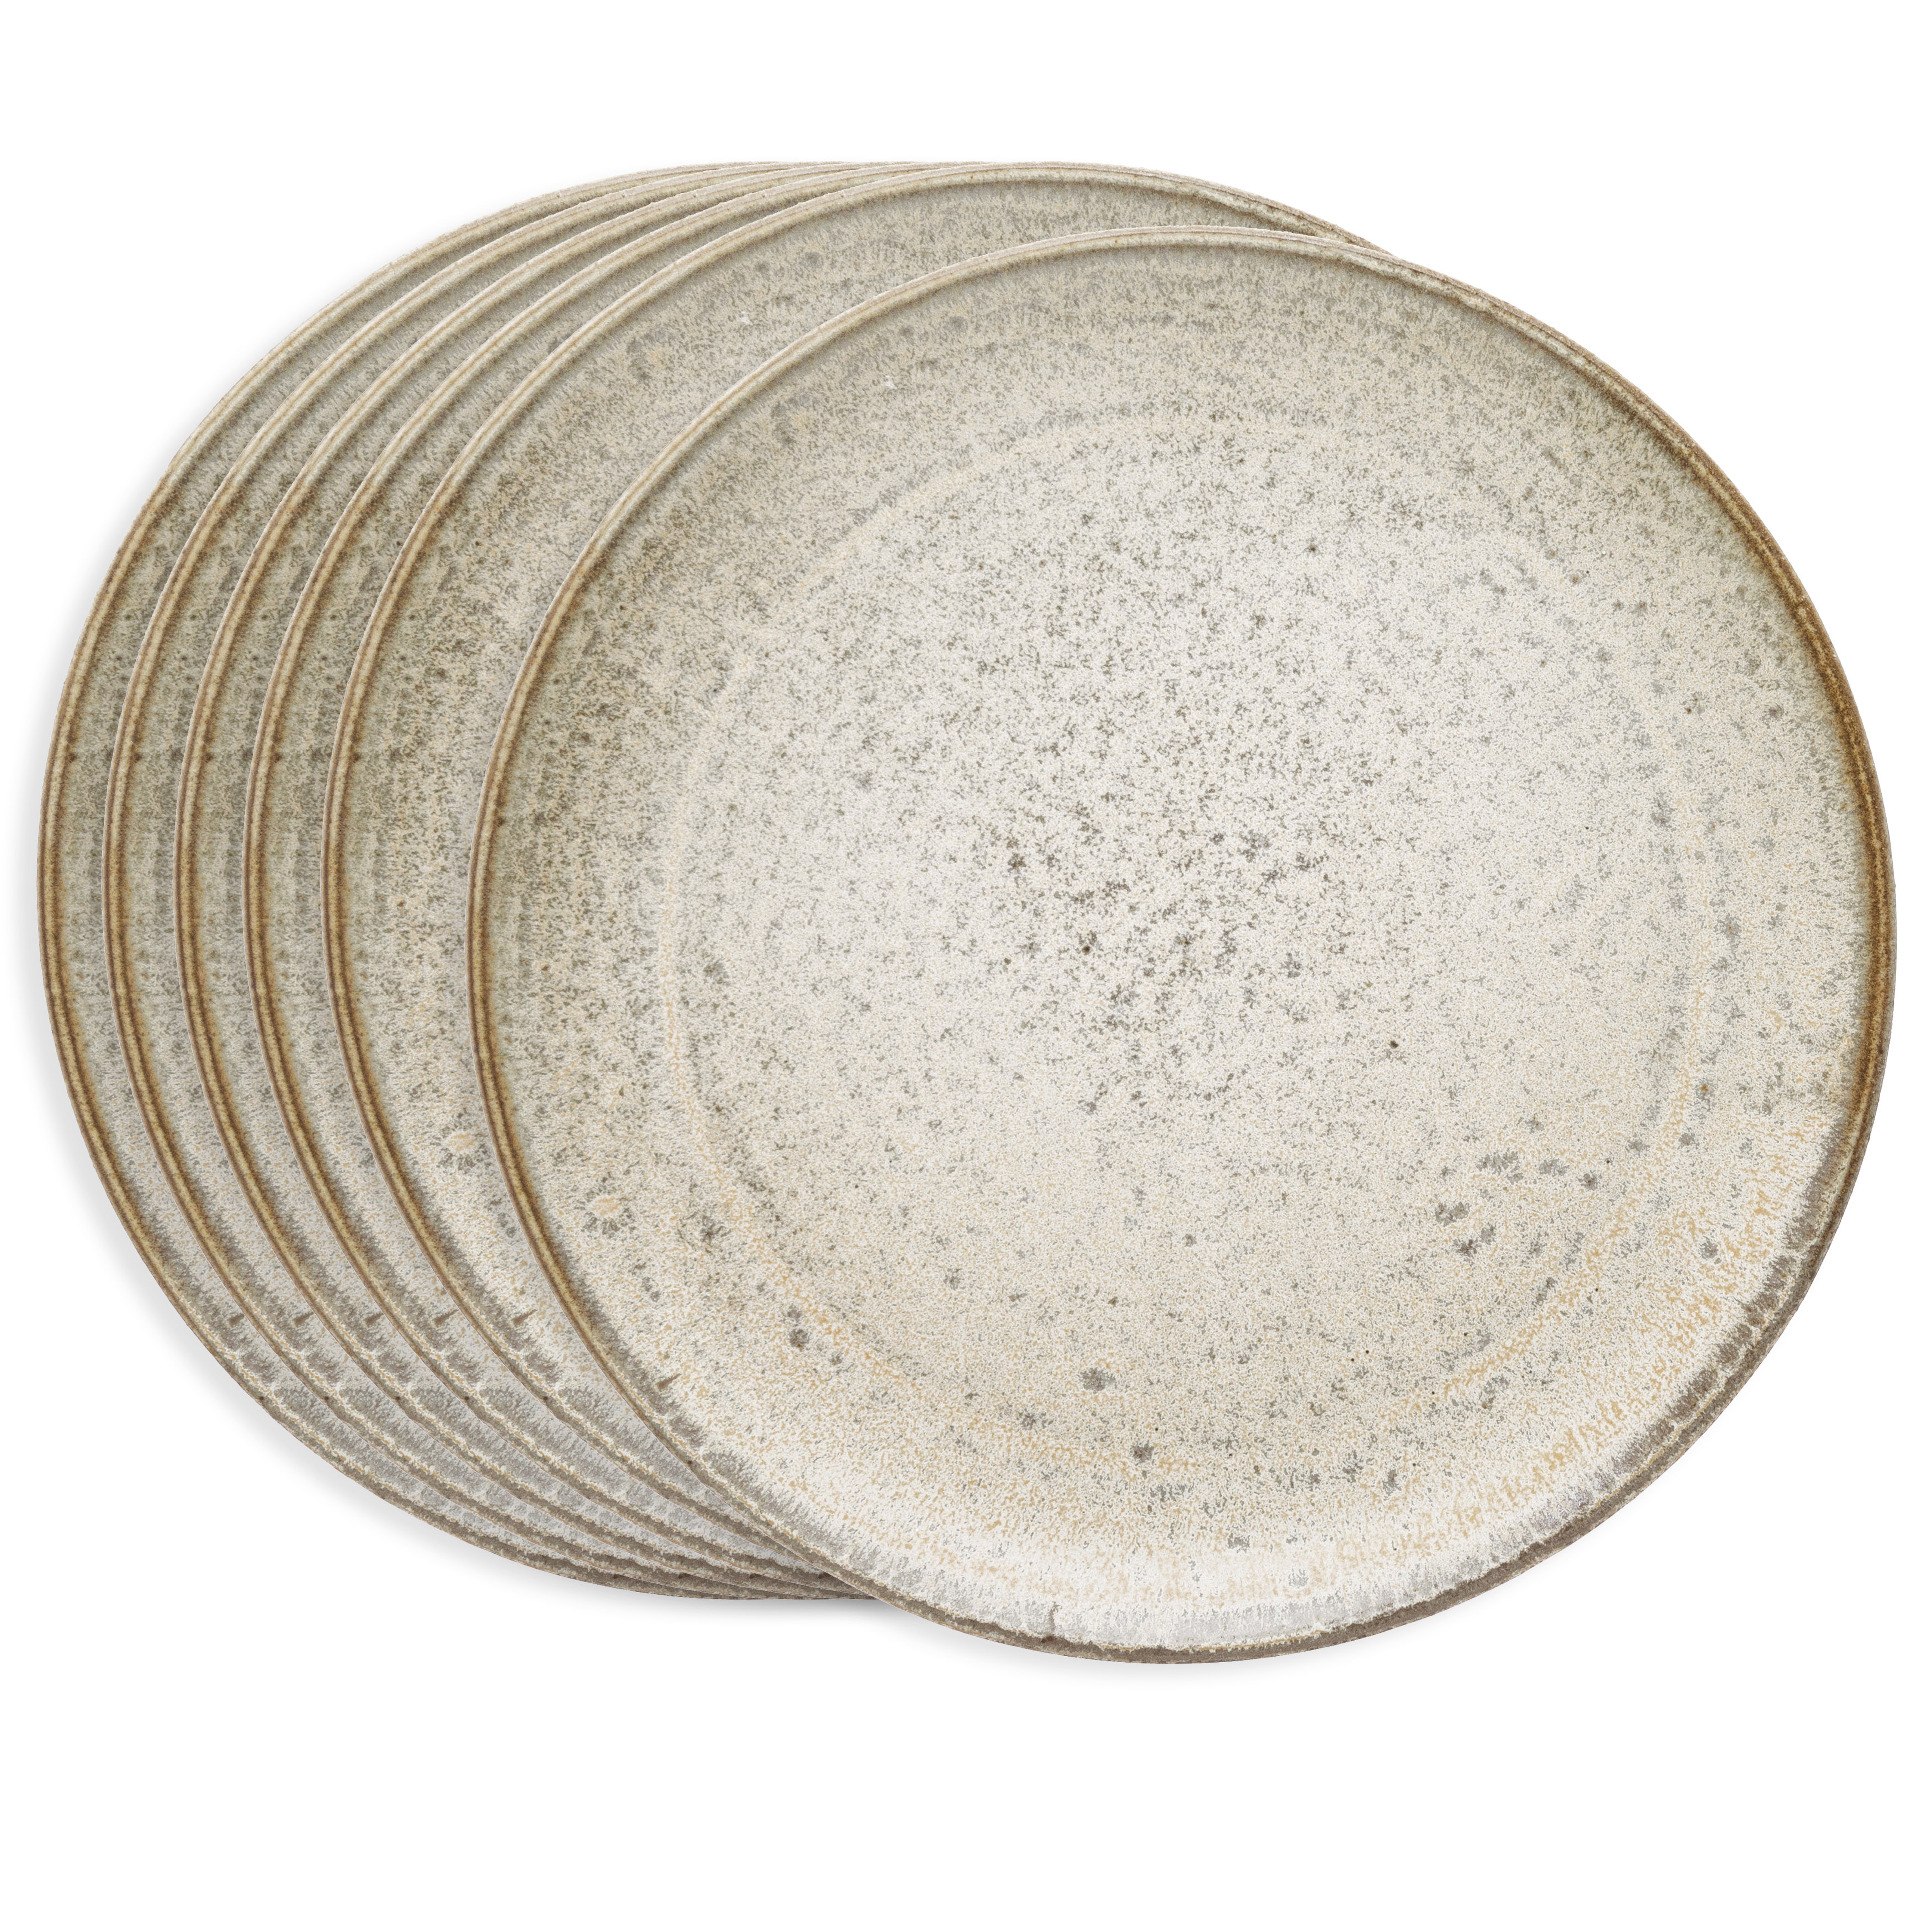 Set of 6, 8" Round Stoneware Plate with Reactive Glaze, Cream - Nomad Home